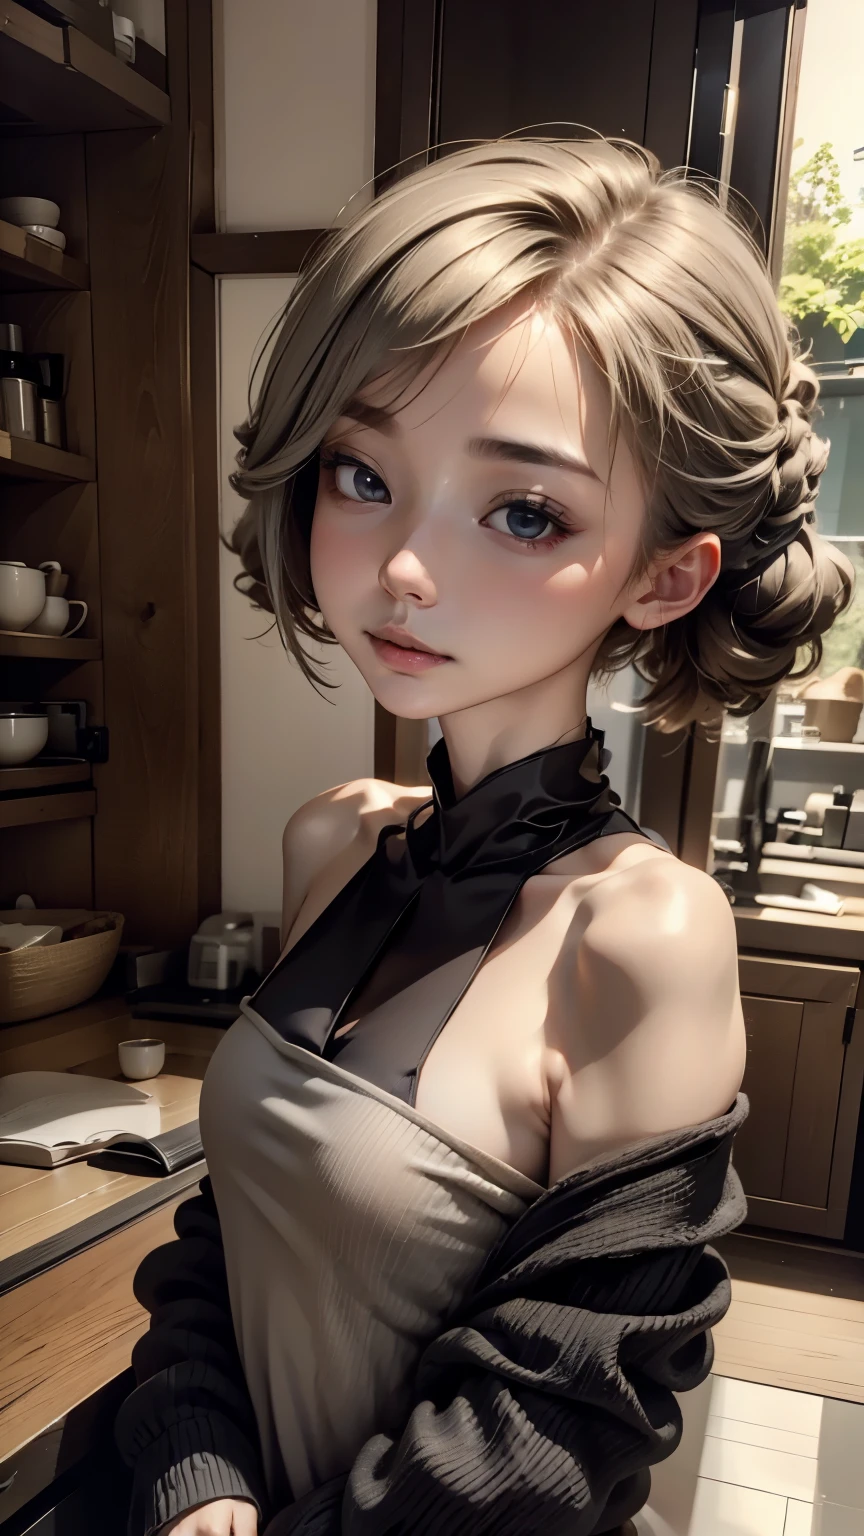 ((wallpaper 8k)), ((surreal)), ((Quality with attention to detail:1.2)), 1 girl, １４talent、kind eyes、plump lips、Ash gray hair、ショートヘアー、短い髪のツインテール、An ennui look、small breasts、small breasts、black elegant dress,Black capelet, look up, Widespread poverty, short cut hair、short hair twintails、Ash gray hair:1.5、white skin、